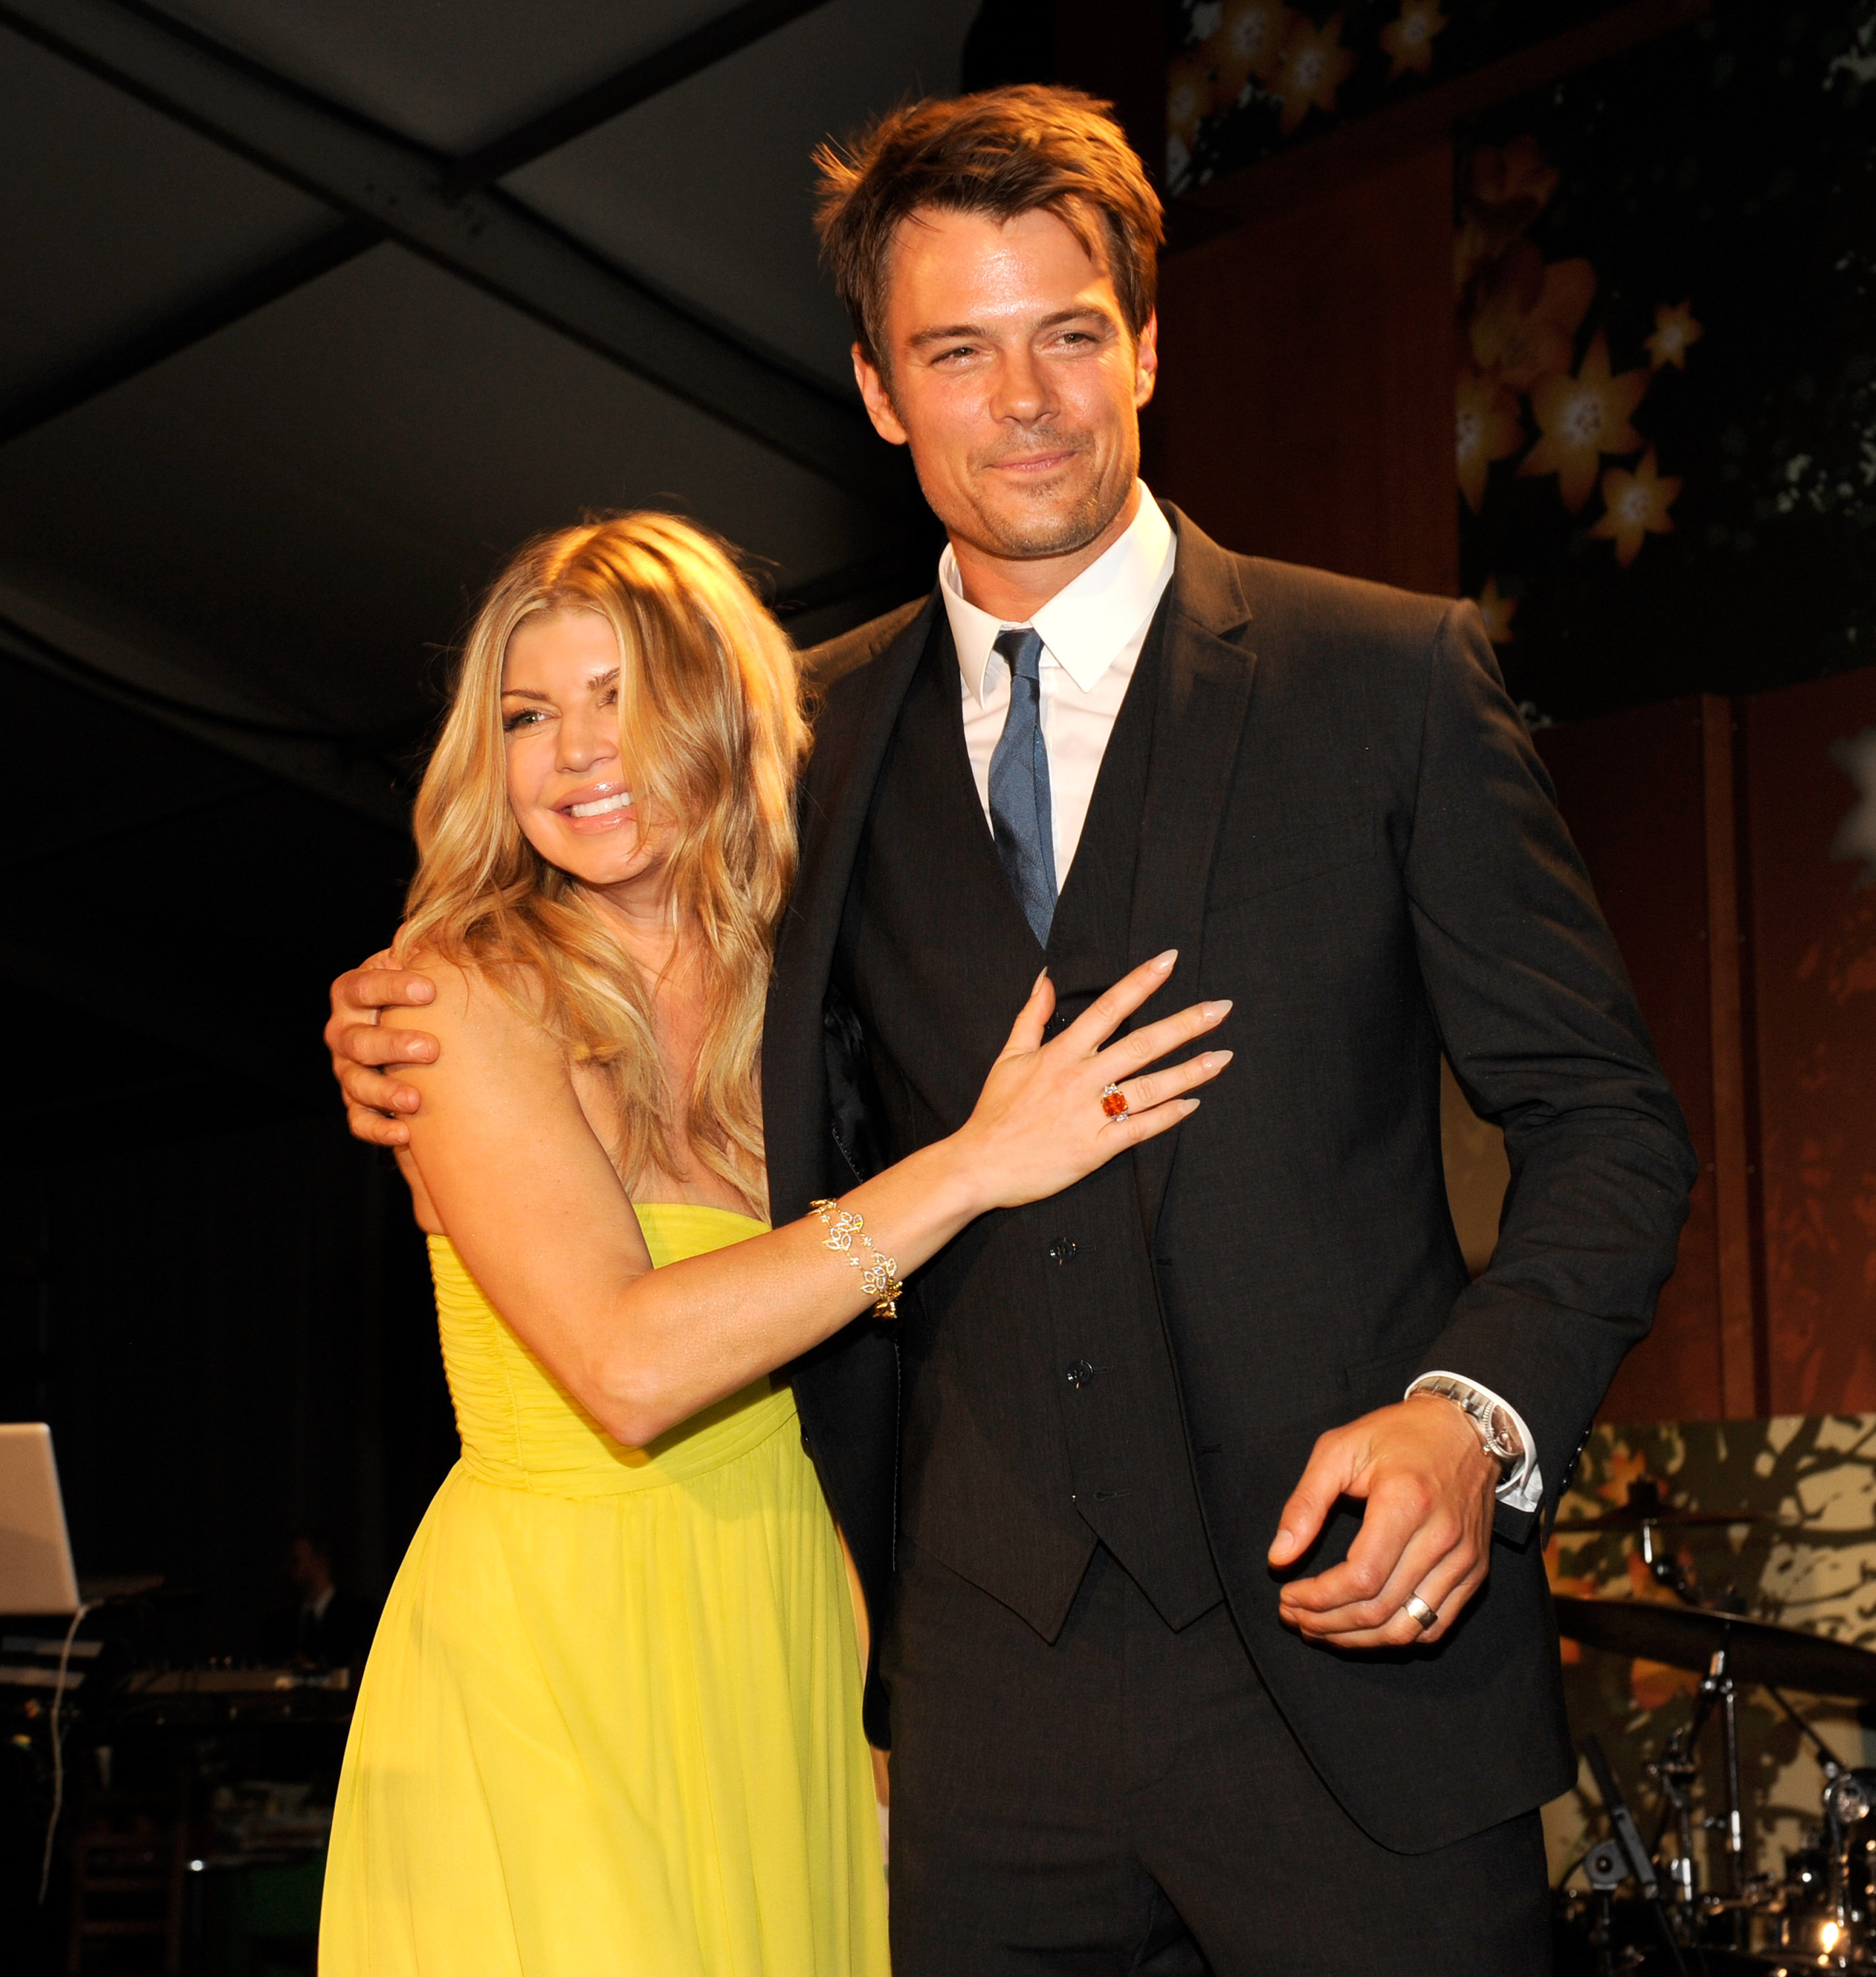 Fergie and Josh Duhamel on stage at the 2011 FiFi Awards at The Tent at Lincoln Center on May 25, 2011 in New York City | Source: Getty Images